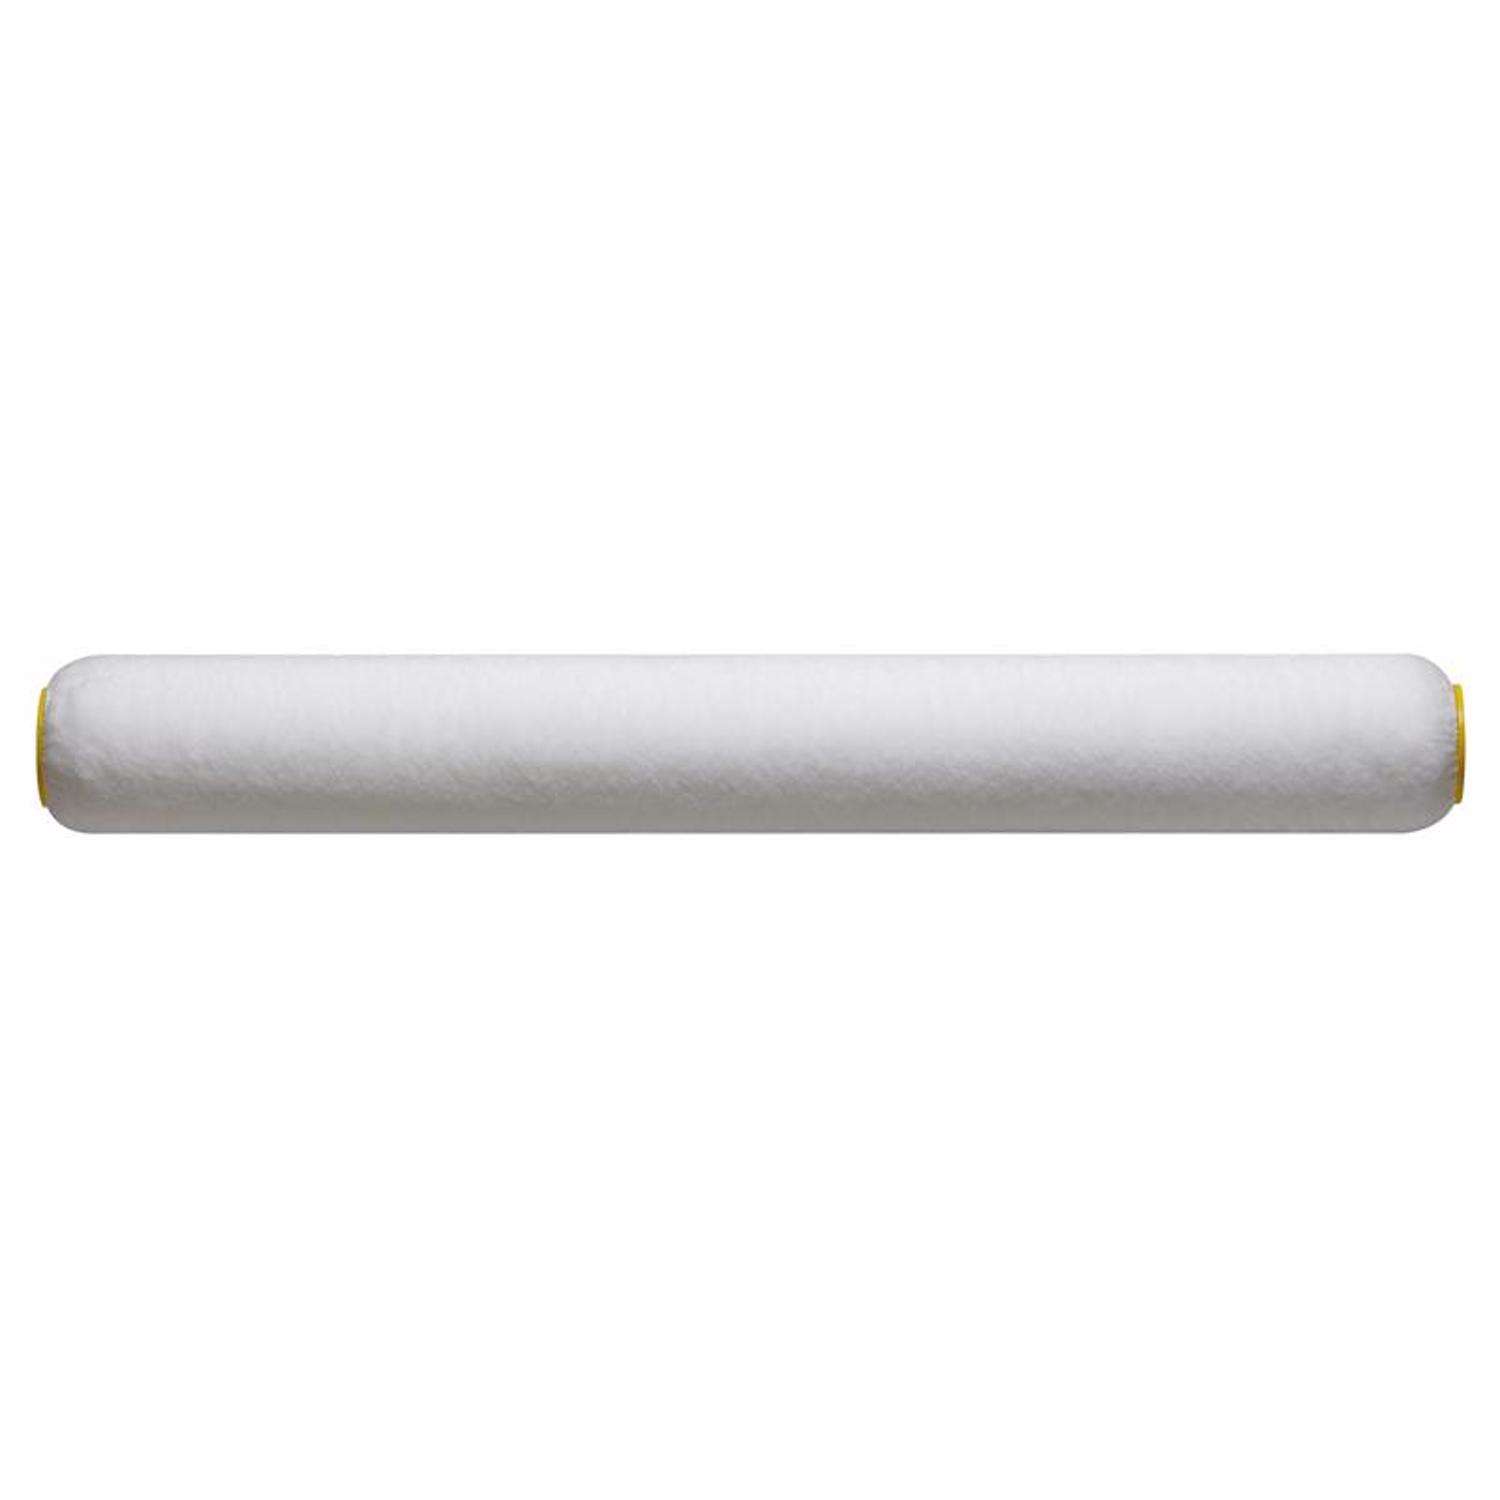 Purdy WhiteDove 9-in x 1/4-in Nap Woven Acrylic Fiber Paint Roller Cover